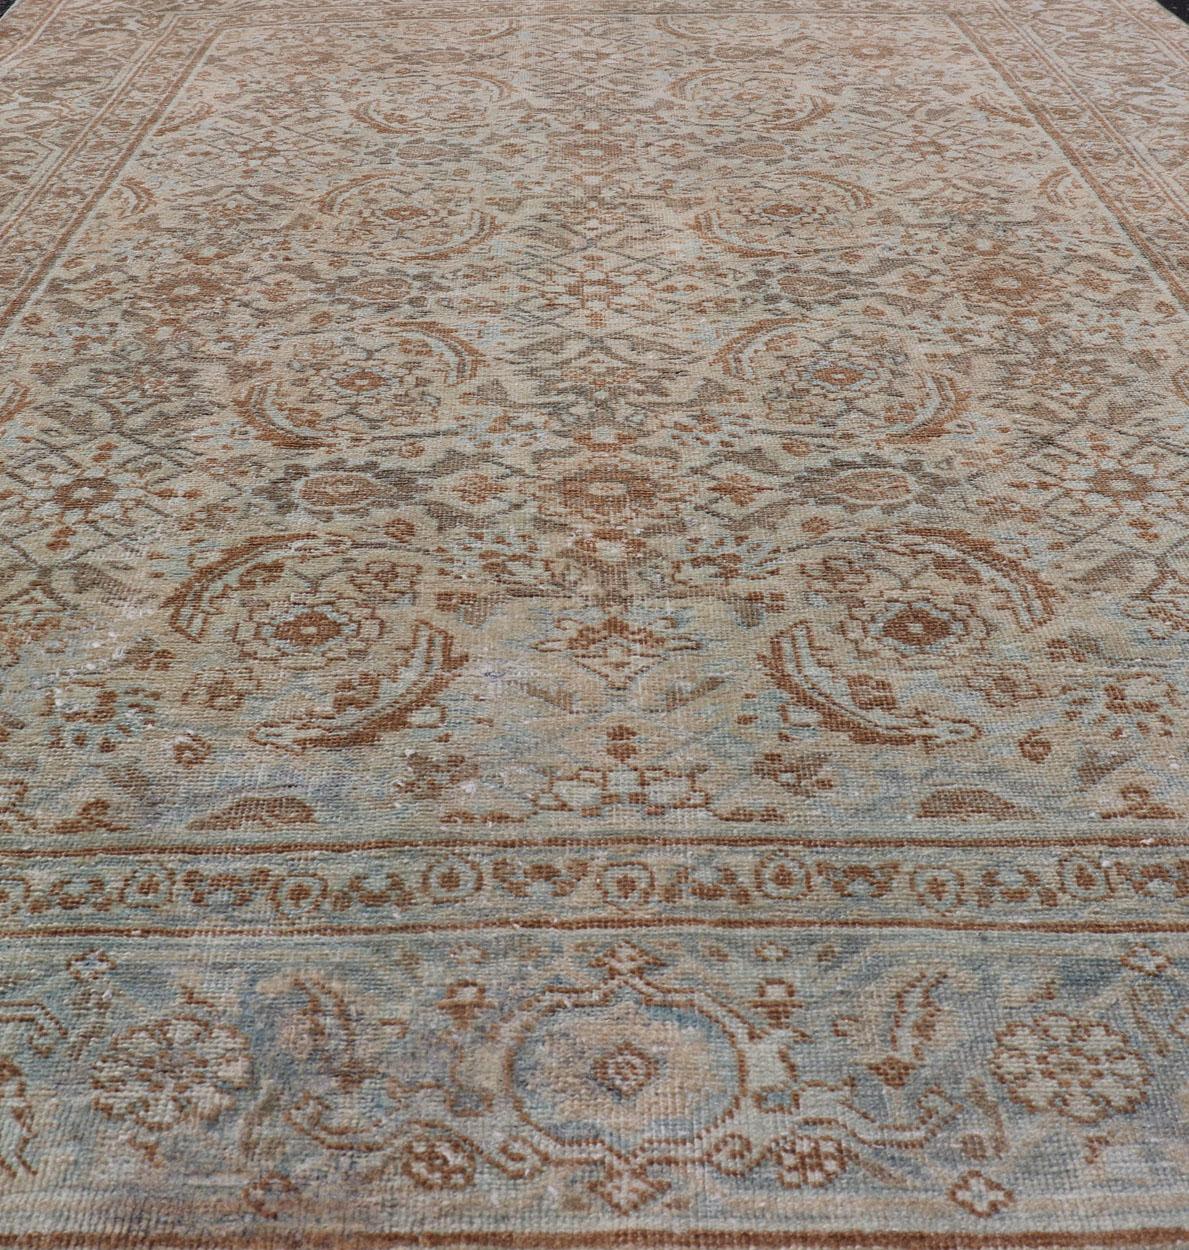 Antique Persian Tabriz Rug in Wool with All-Over Floral Design in Earth Colors In Good Condition For Sale In Atlanta, GA